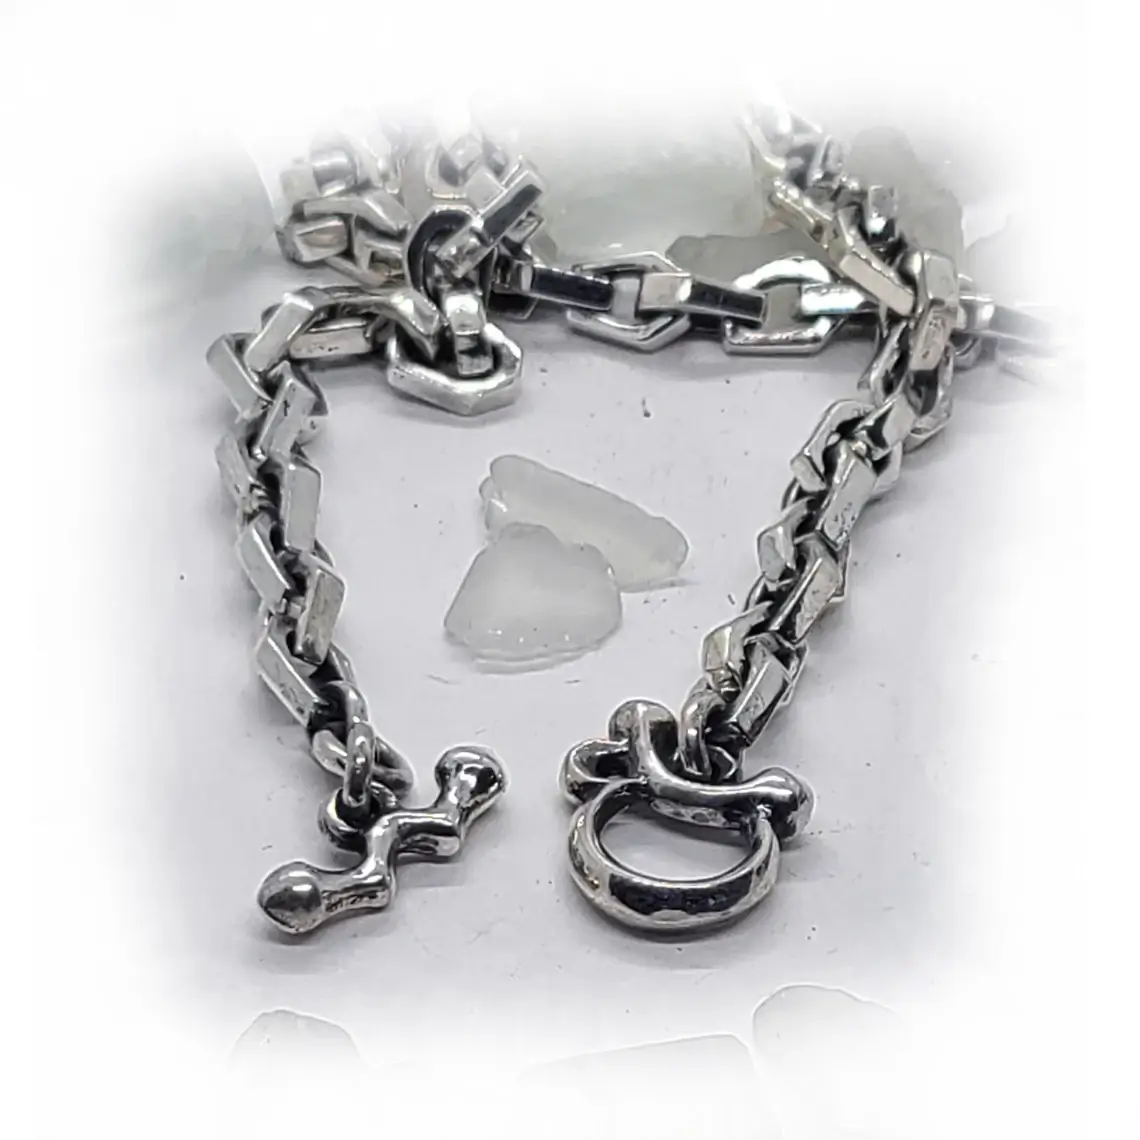 Skull Key and Lock Necklace Handmade in Sterling Silver With 